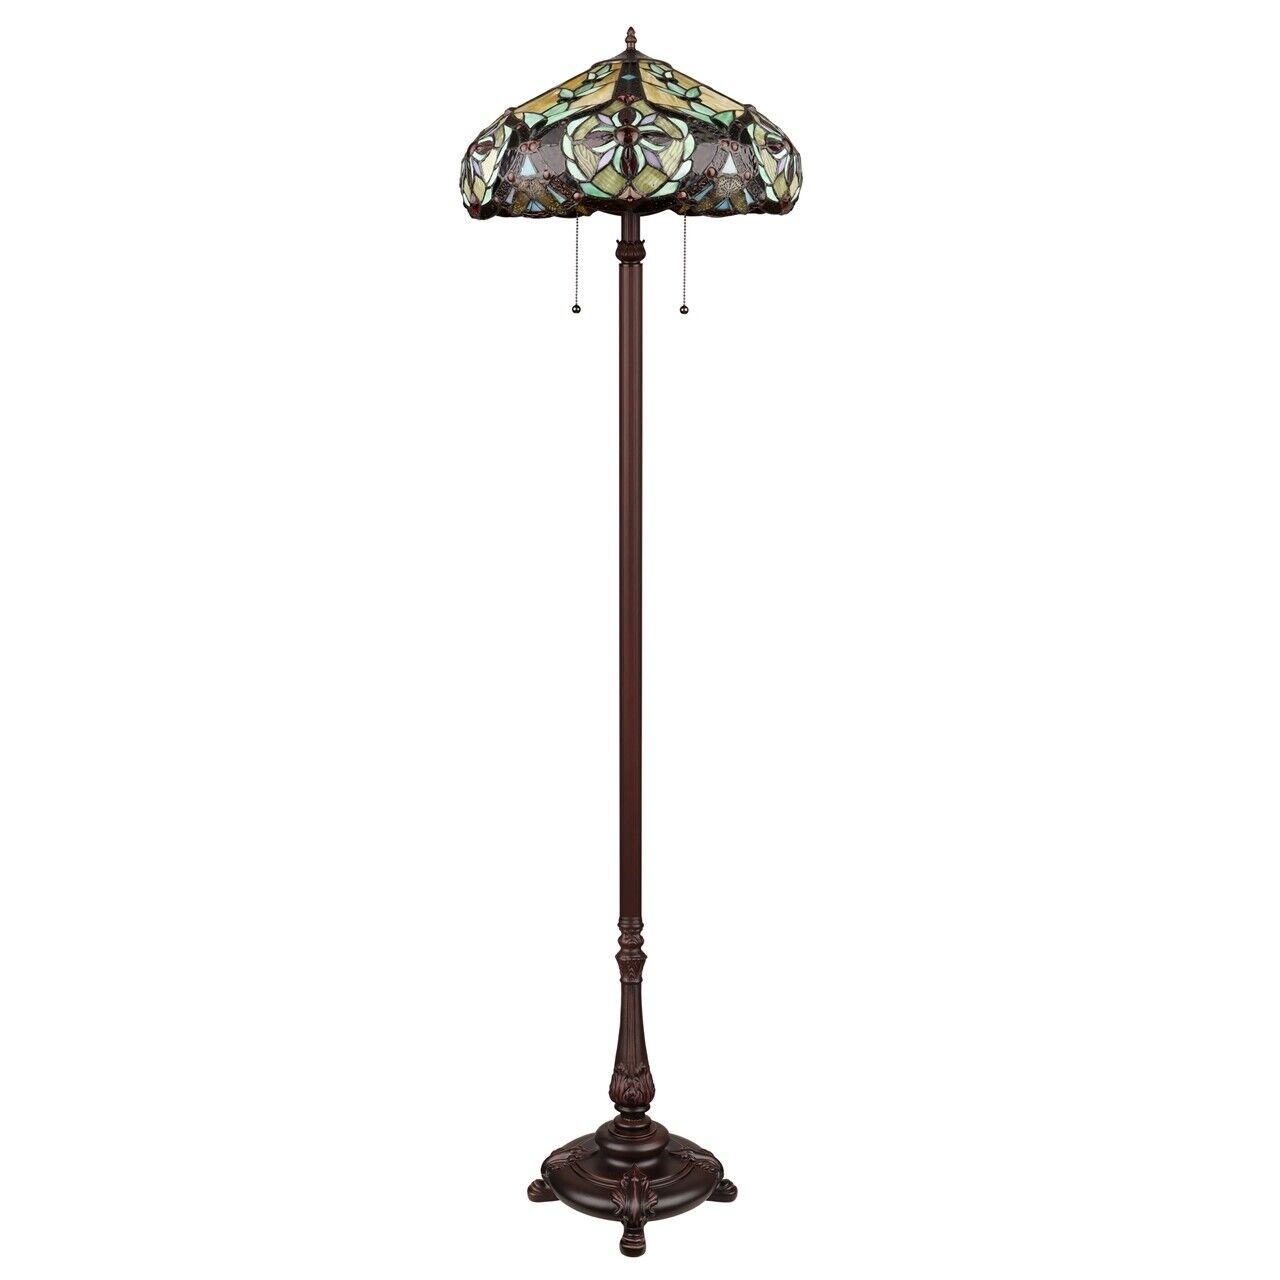 65 1/2" Antique Style Stained Glass 2 light Pull Chain Floor Lamp